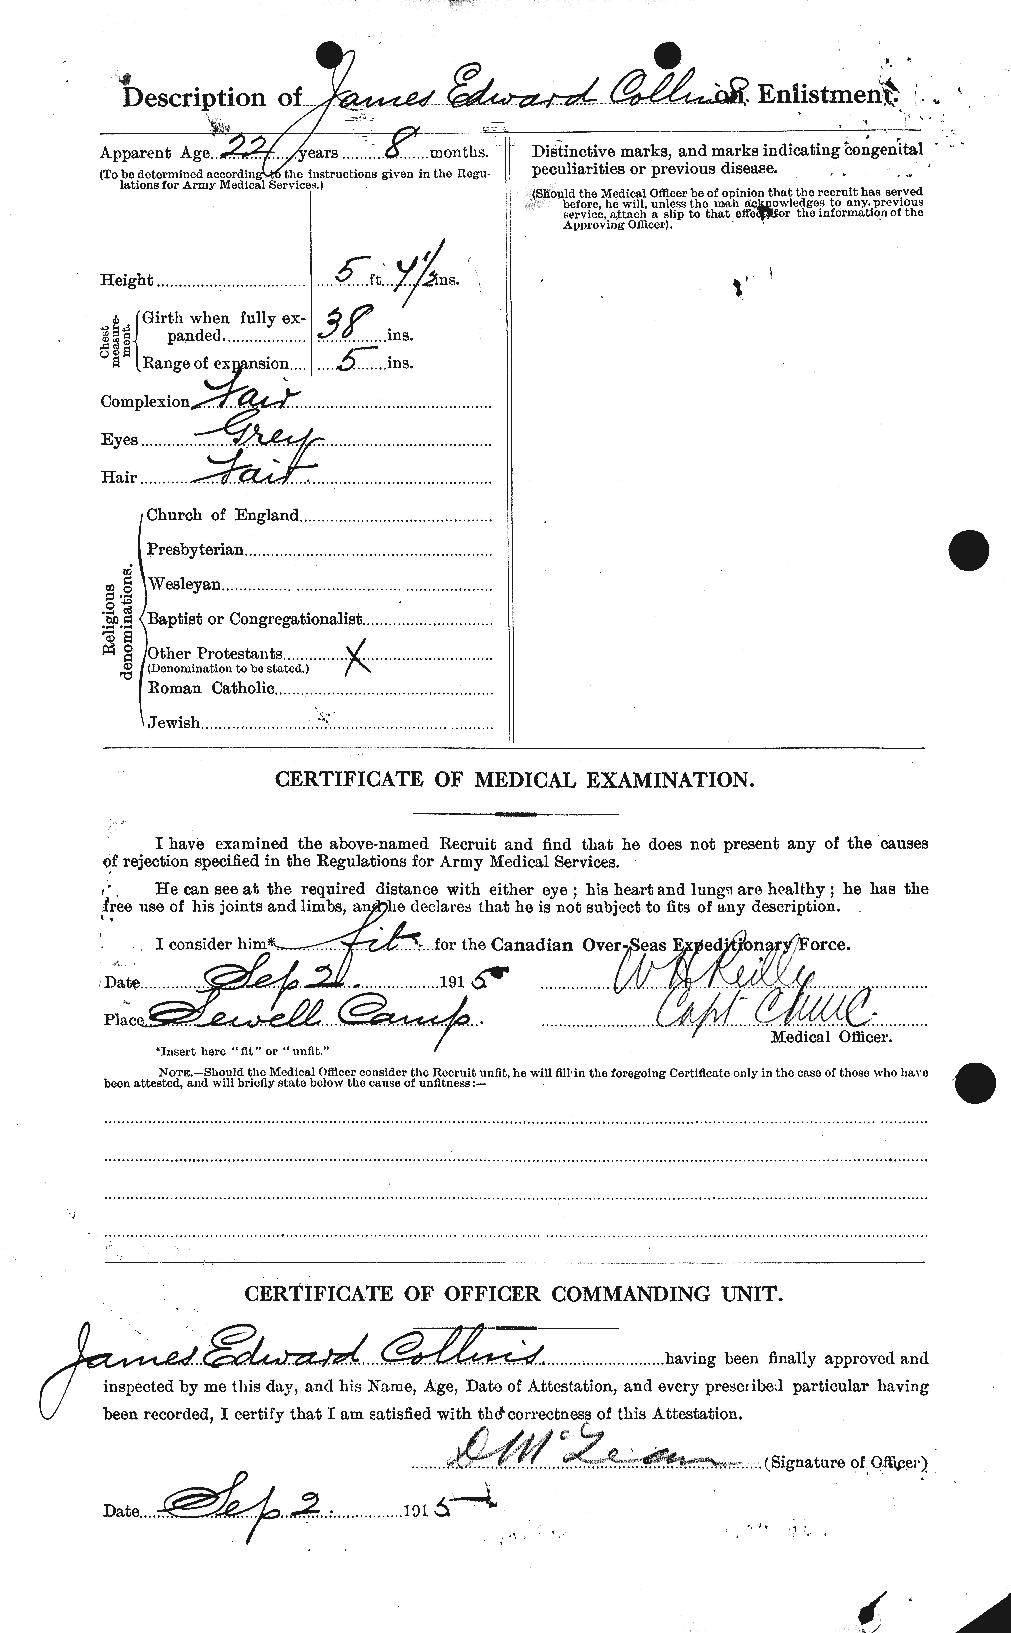 Personnel Records of the First World War - CEF 069953b